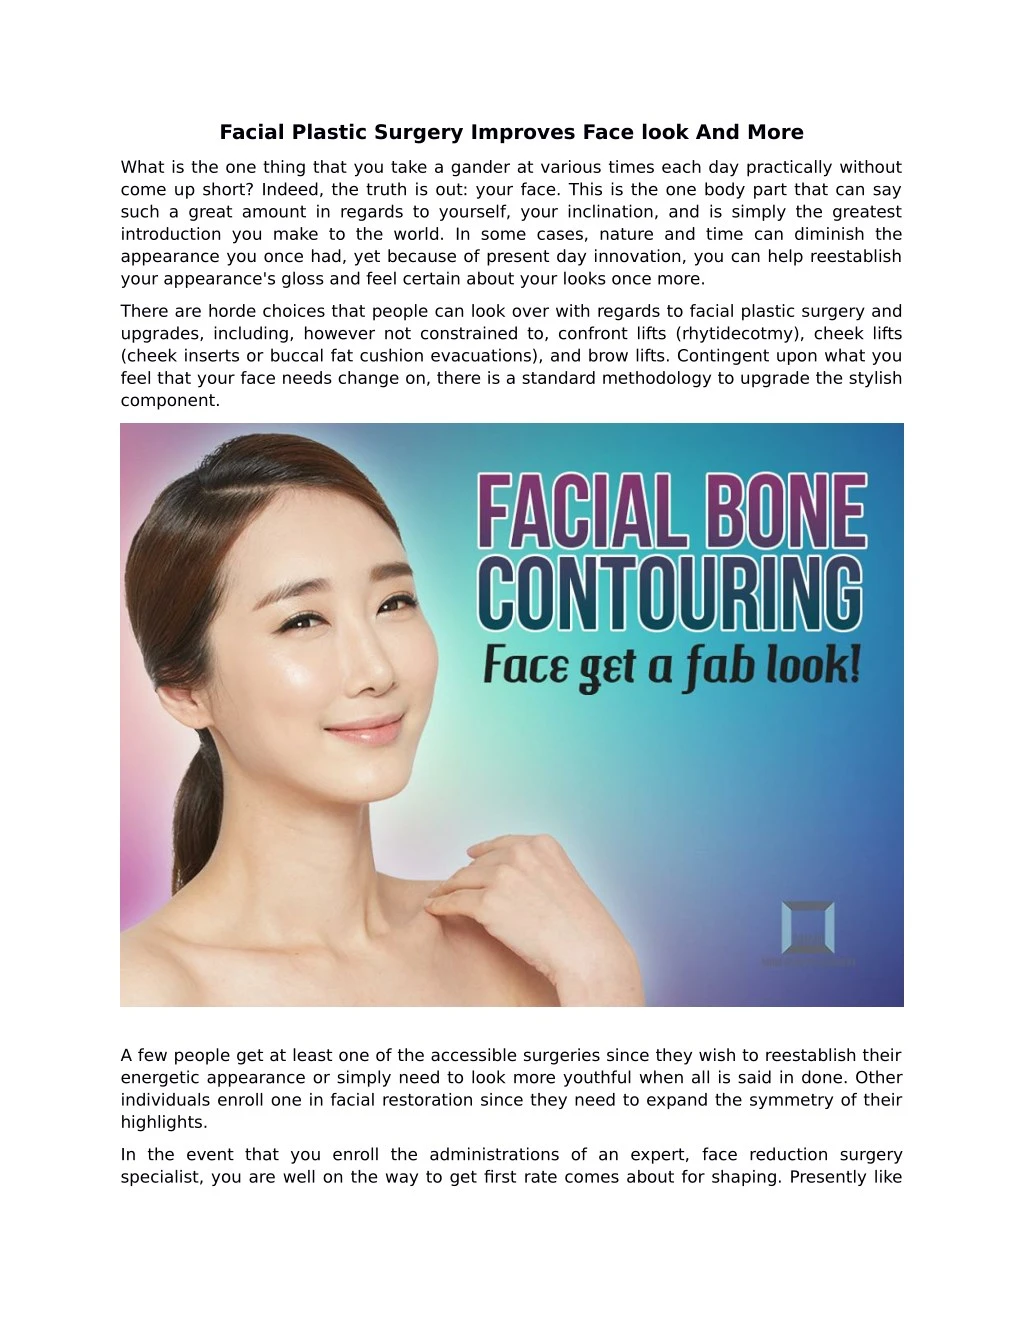 facial plastic surgery improves face look and more